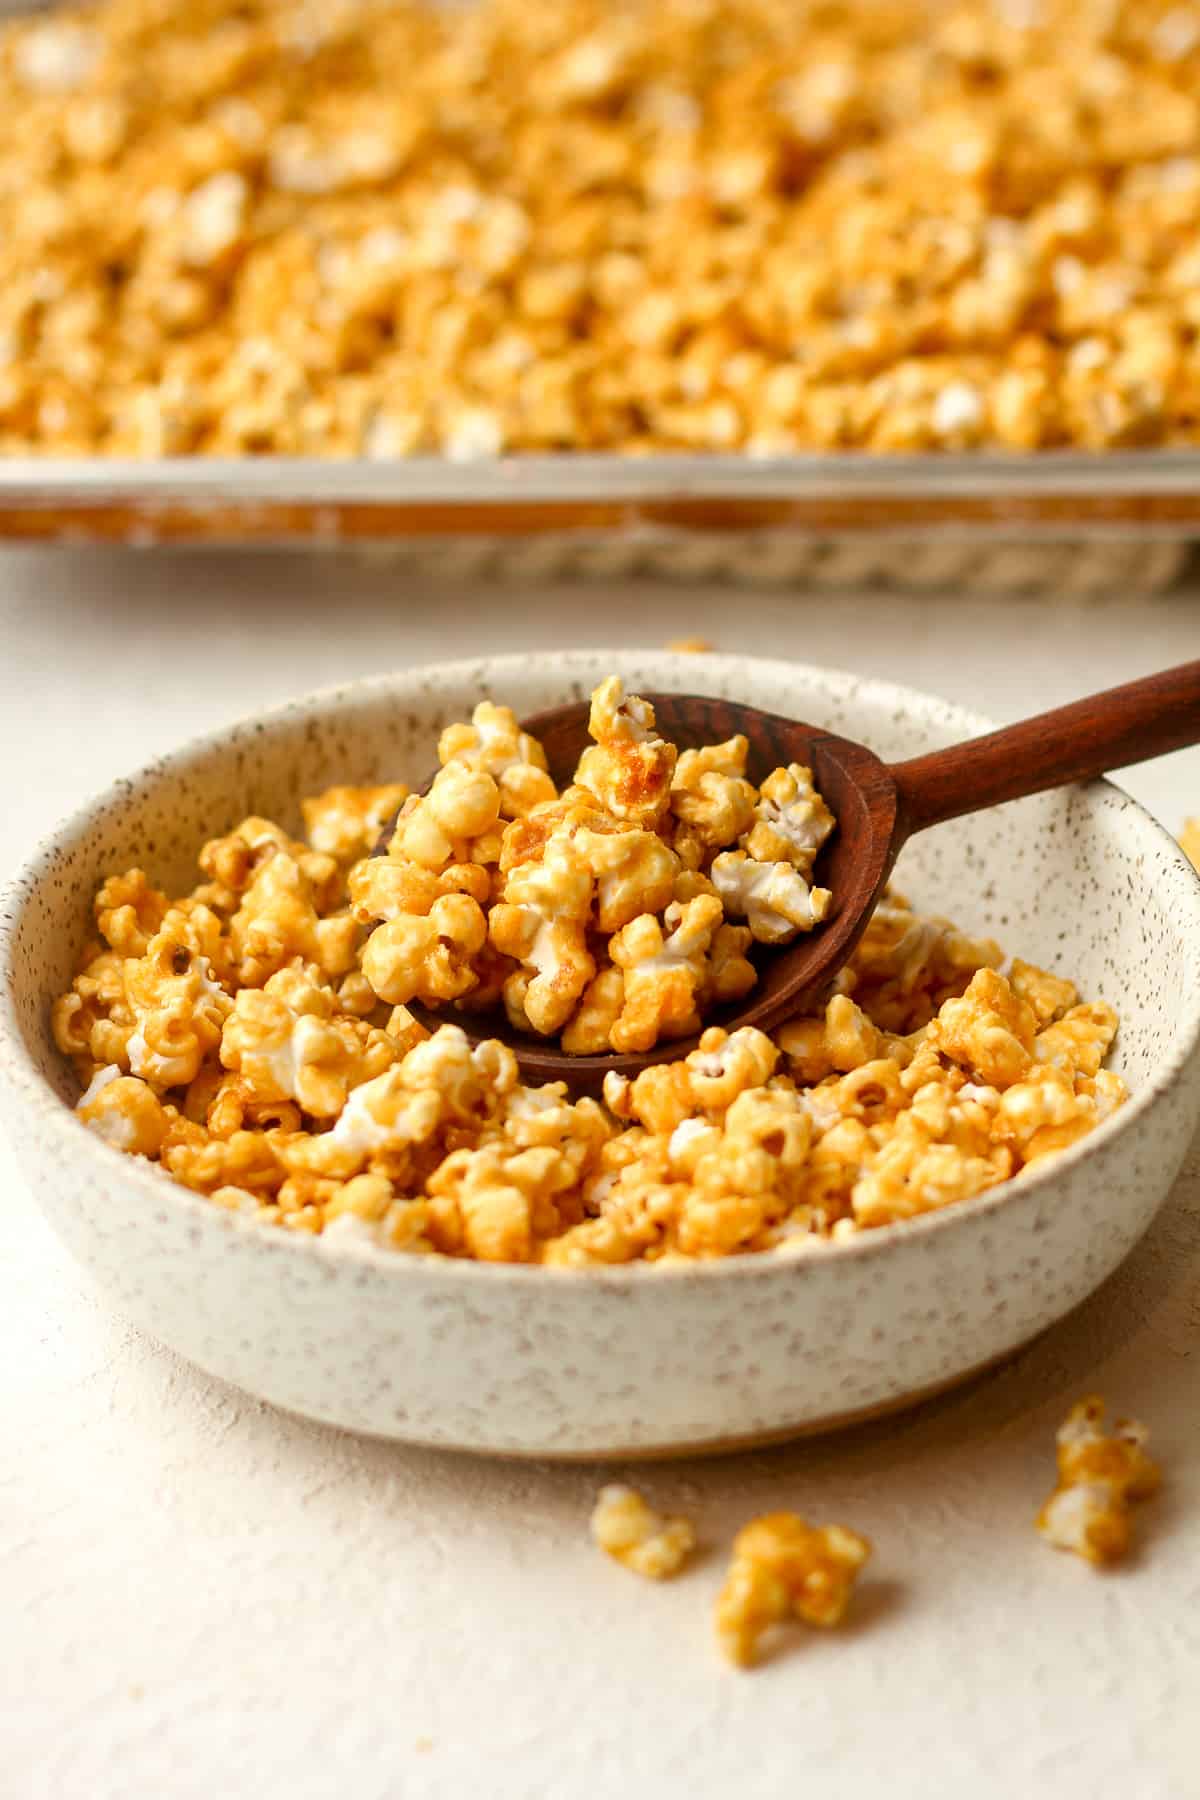 A bowl of caramel popcorn in front of a pan of it.